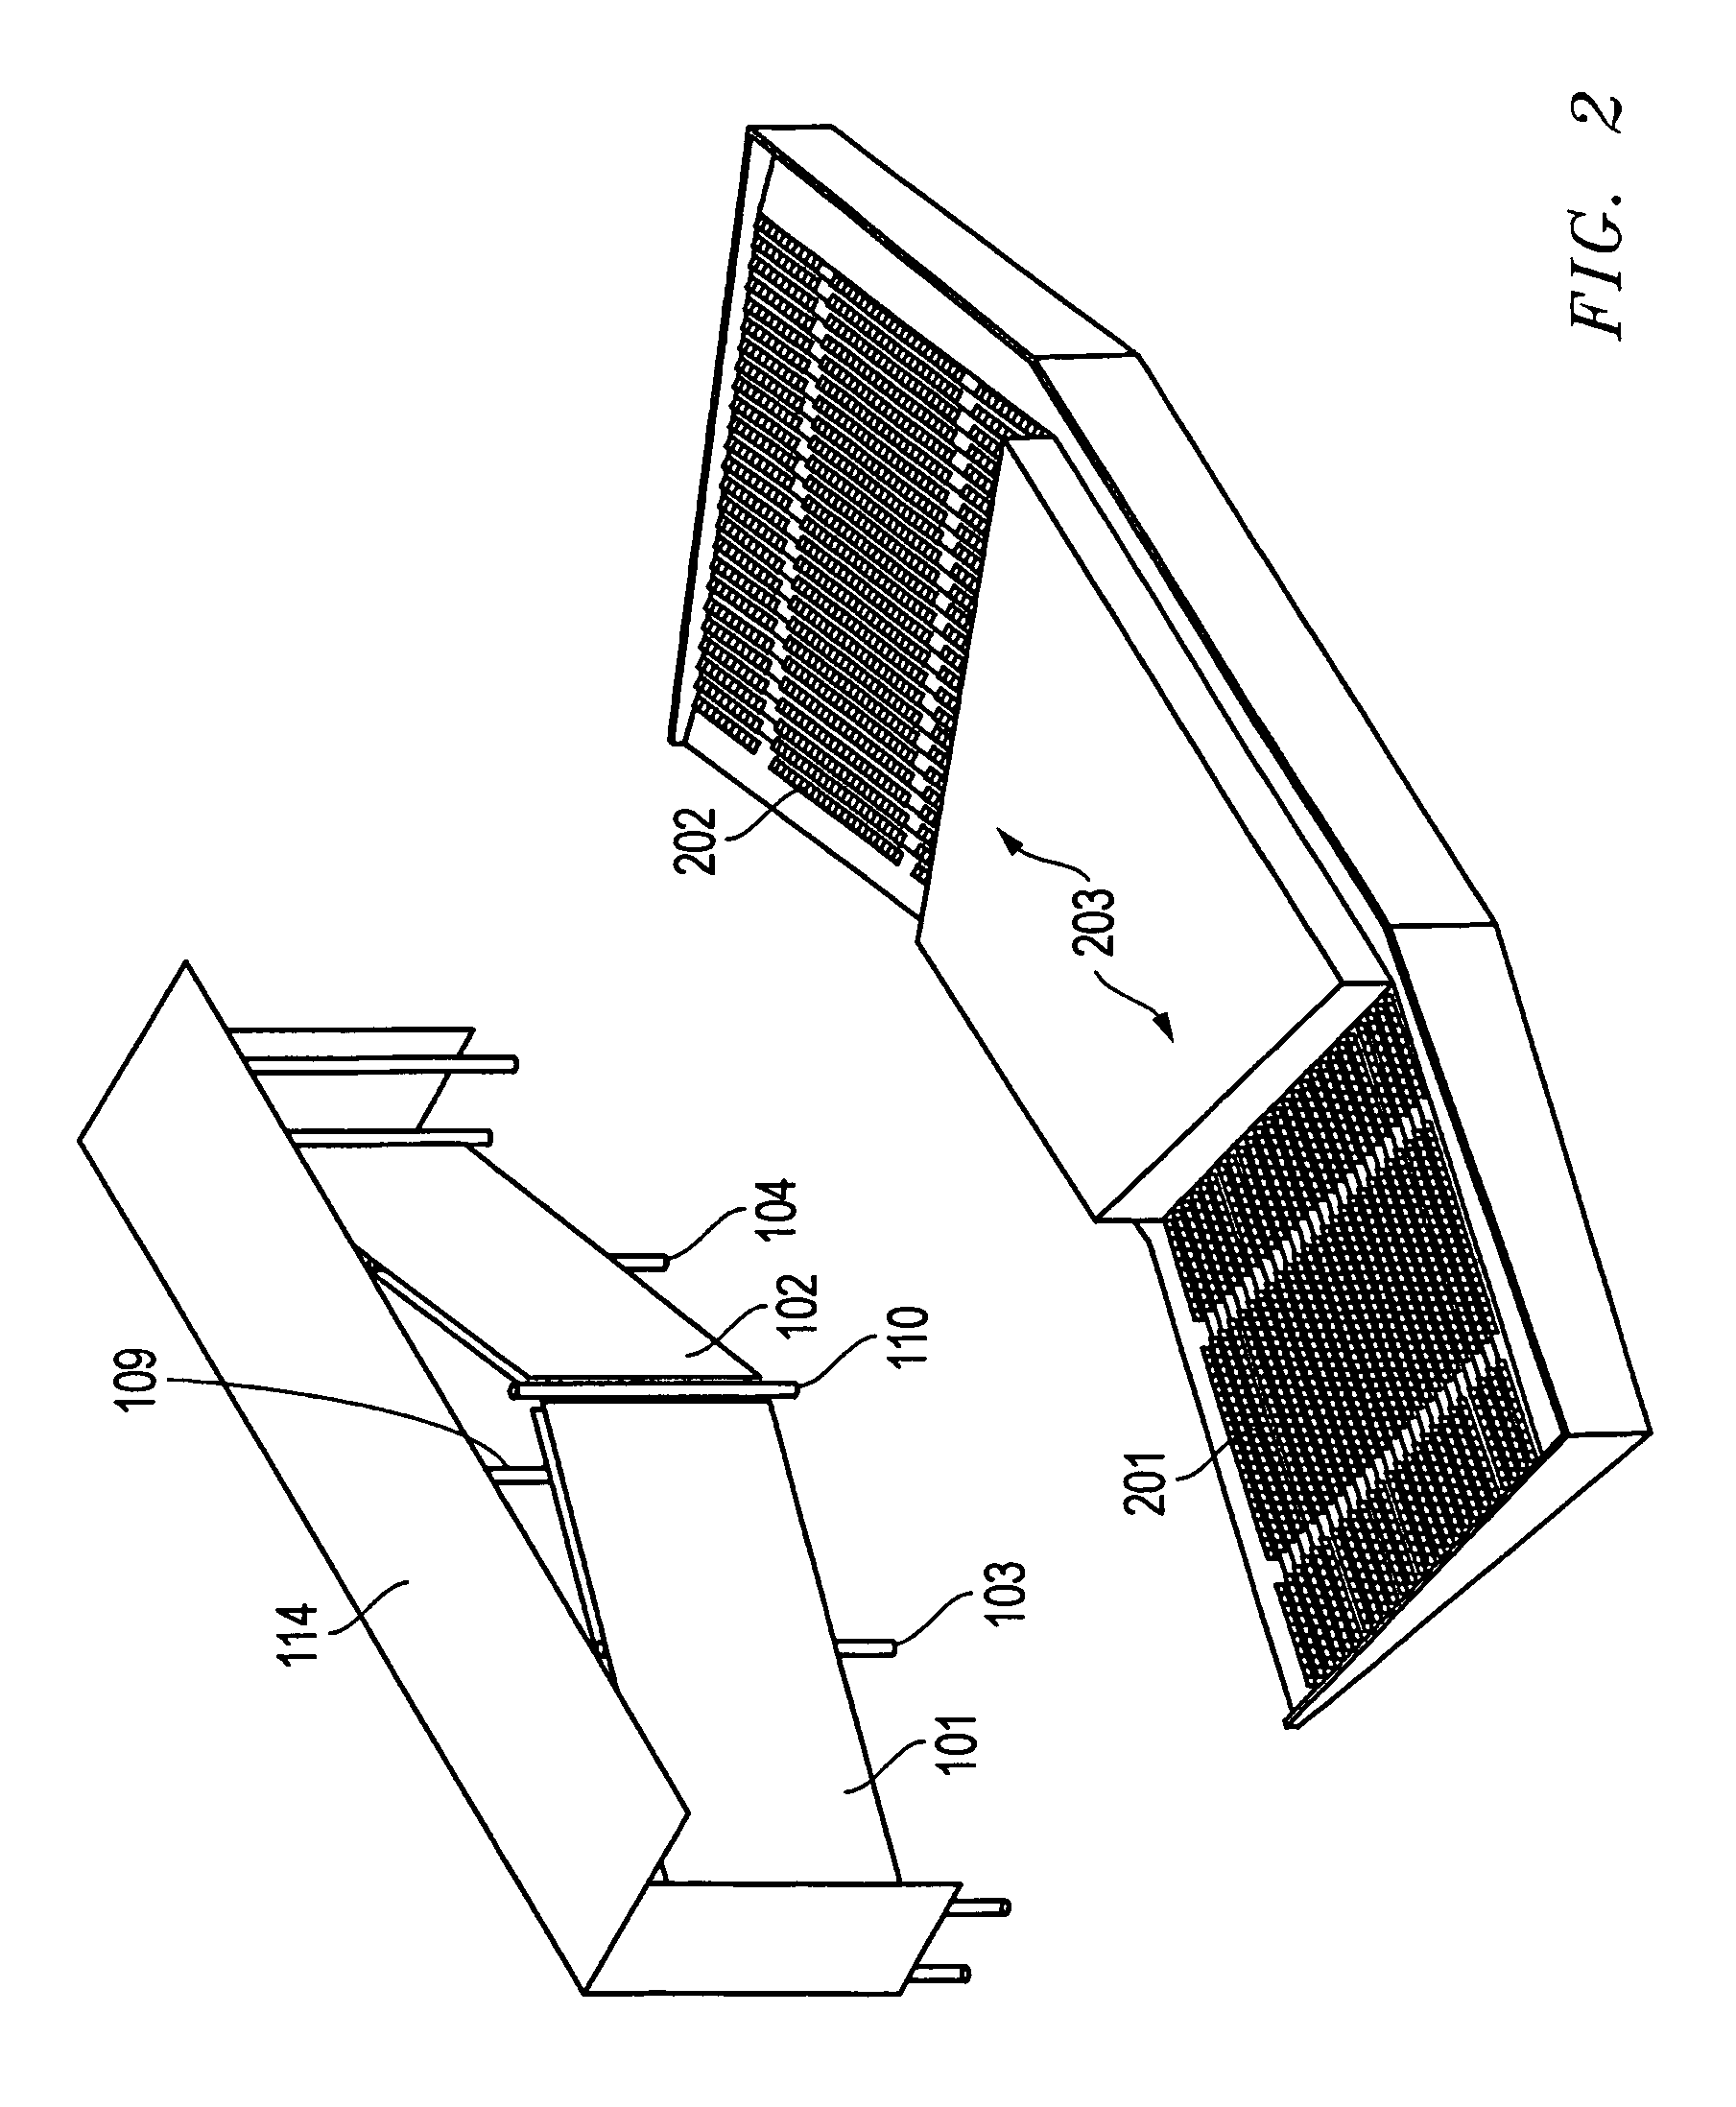 Method and system for projecting audio and video in an outdoor theater